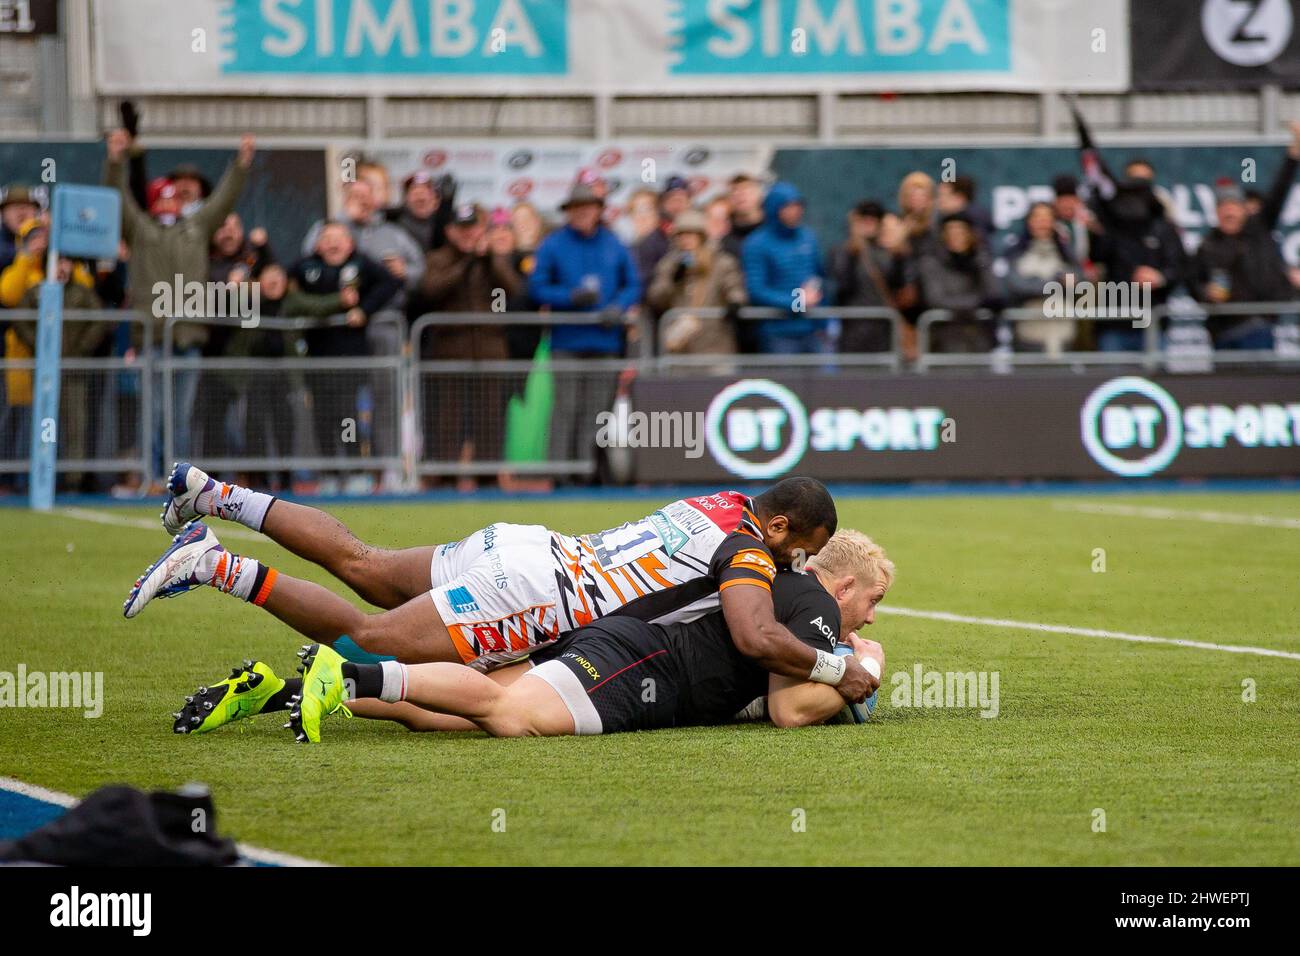 Barnet, United Kingdom. 05th Mar, 2022. Gallagher Premiership Rugby. Saracens V Leicester Tigers. StoneX Stadium. Barnet. Richard Barrington of Saracens scores a try as he is tackled by Kini Murimurivalu of Leicester Tigers Credit: Sport In Pictures/Alamy Live News Stock Photo